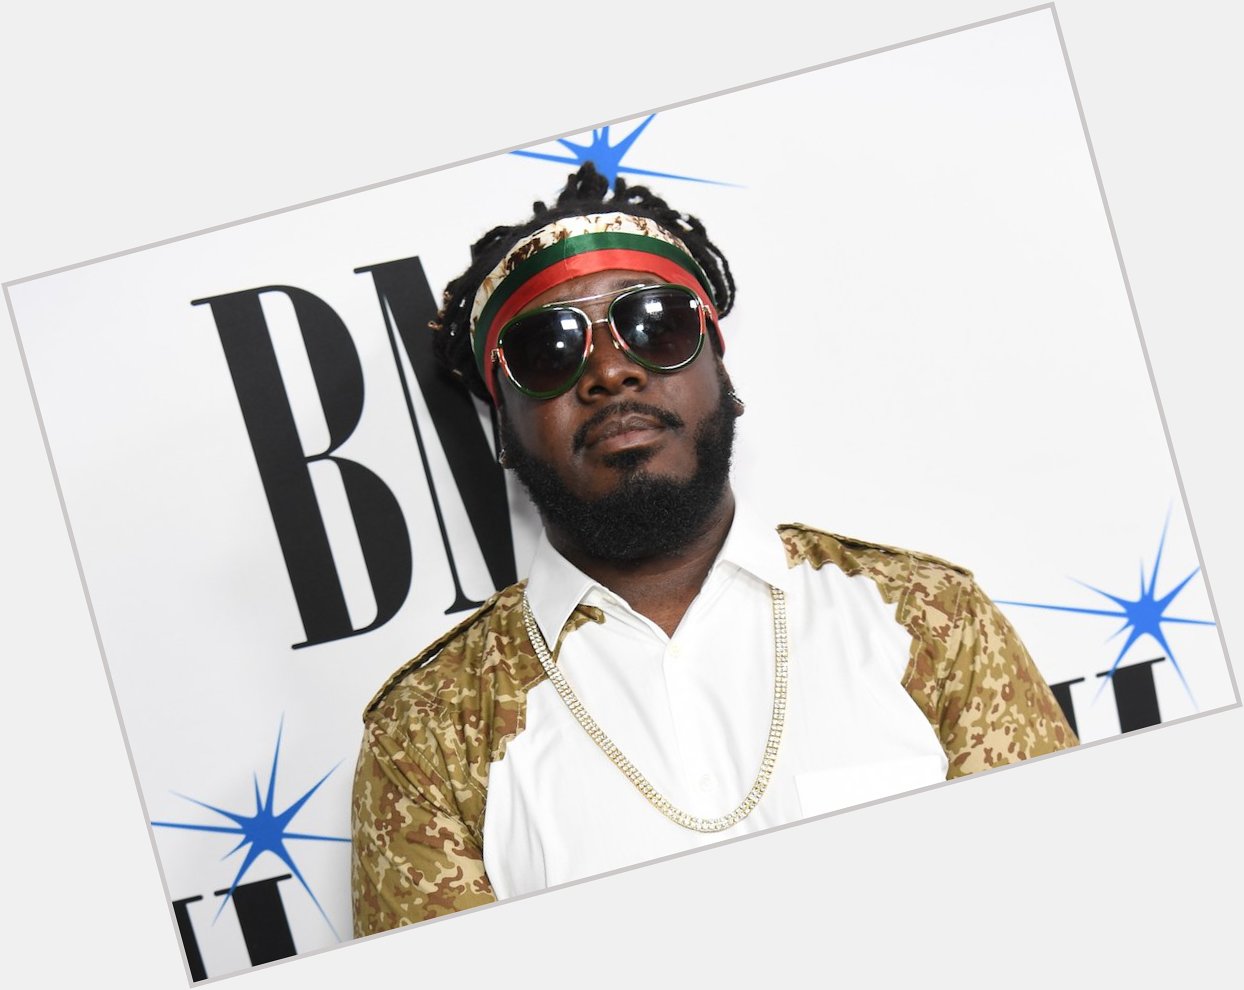 New post (Happy Birthday, T-Pain!) has been published on Top Heavy Hits -  